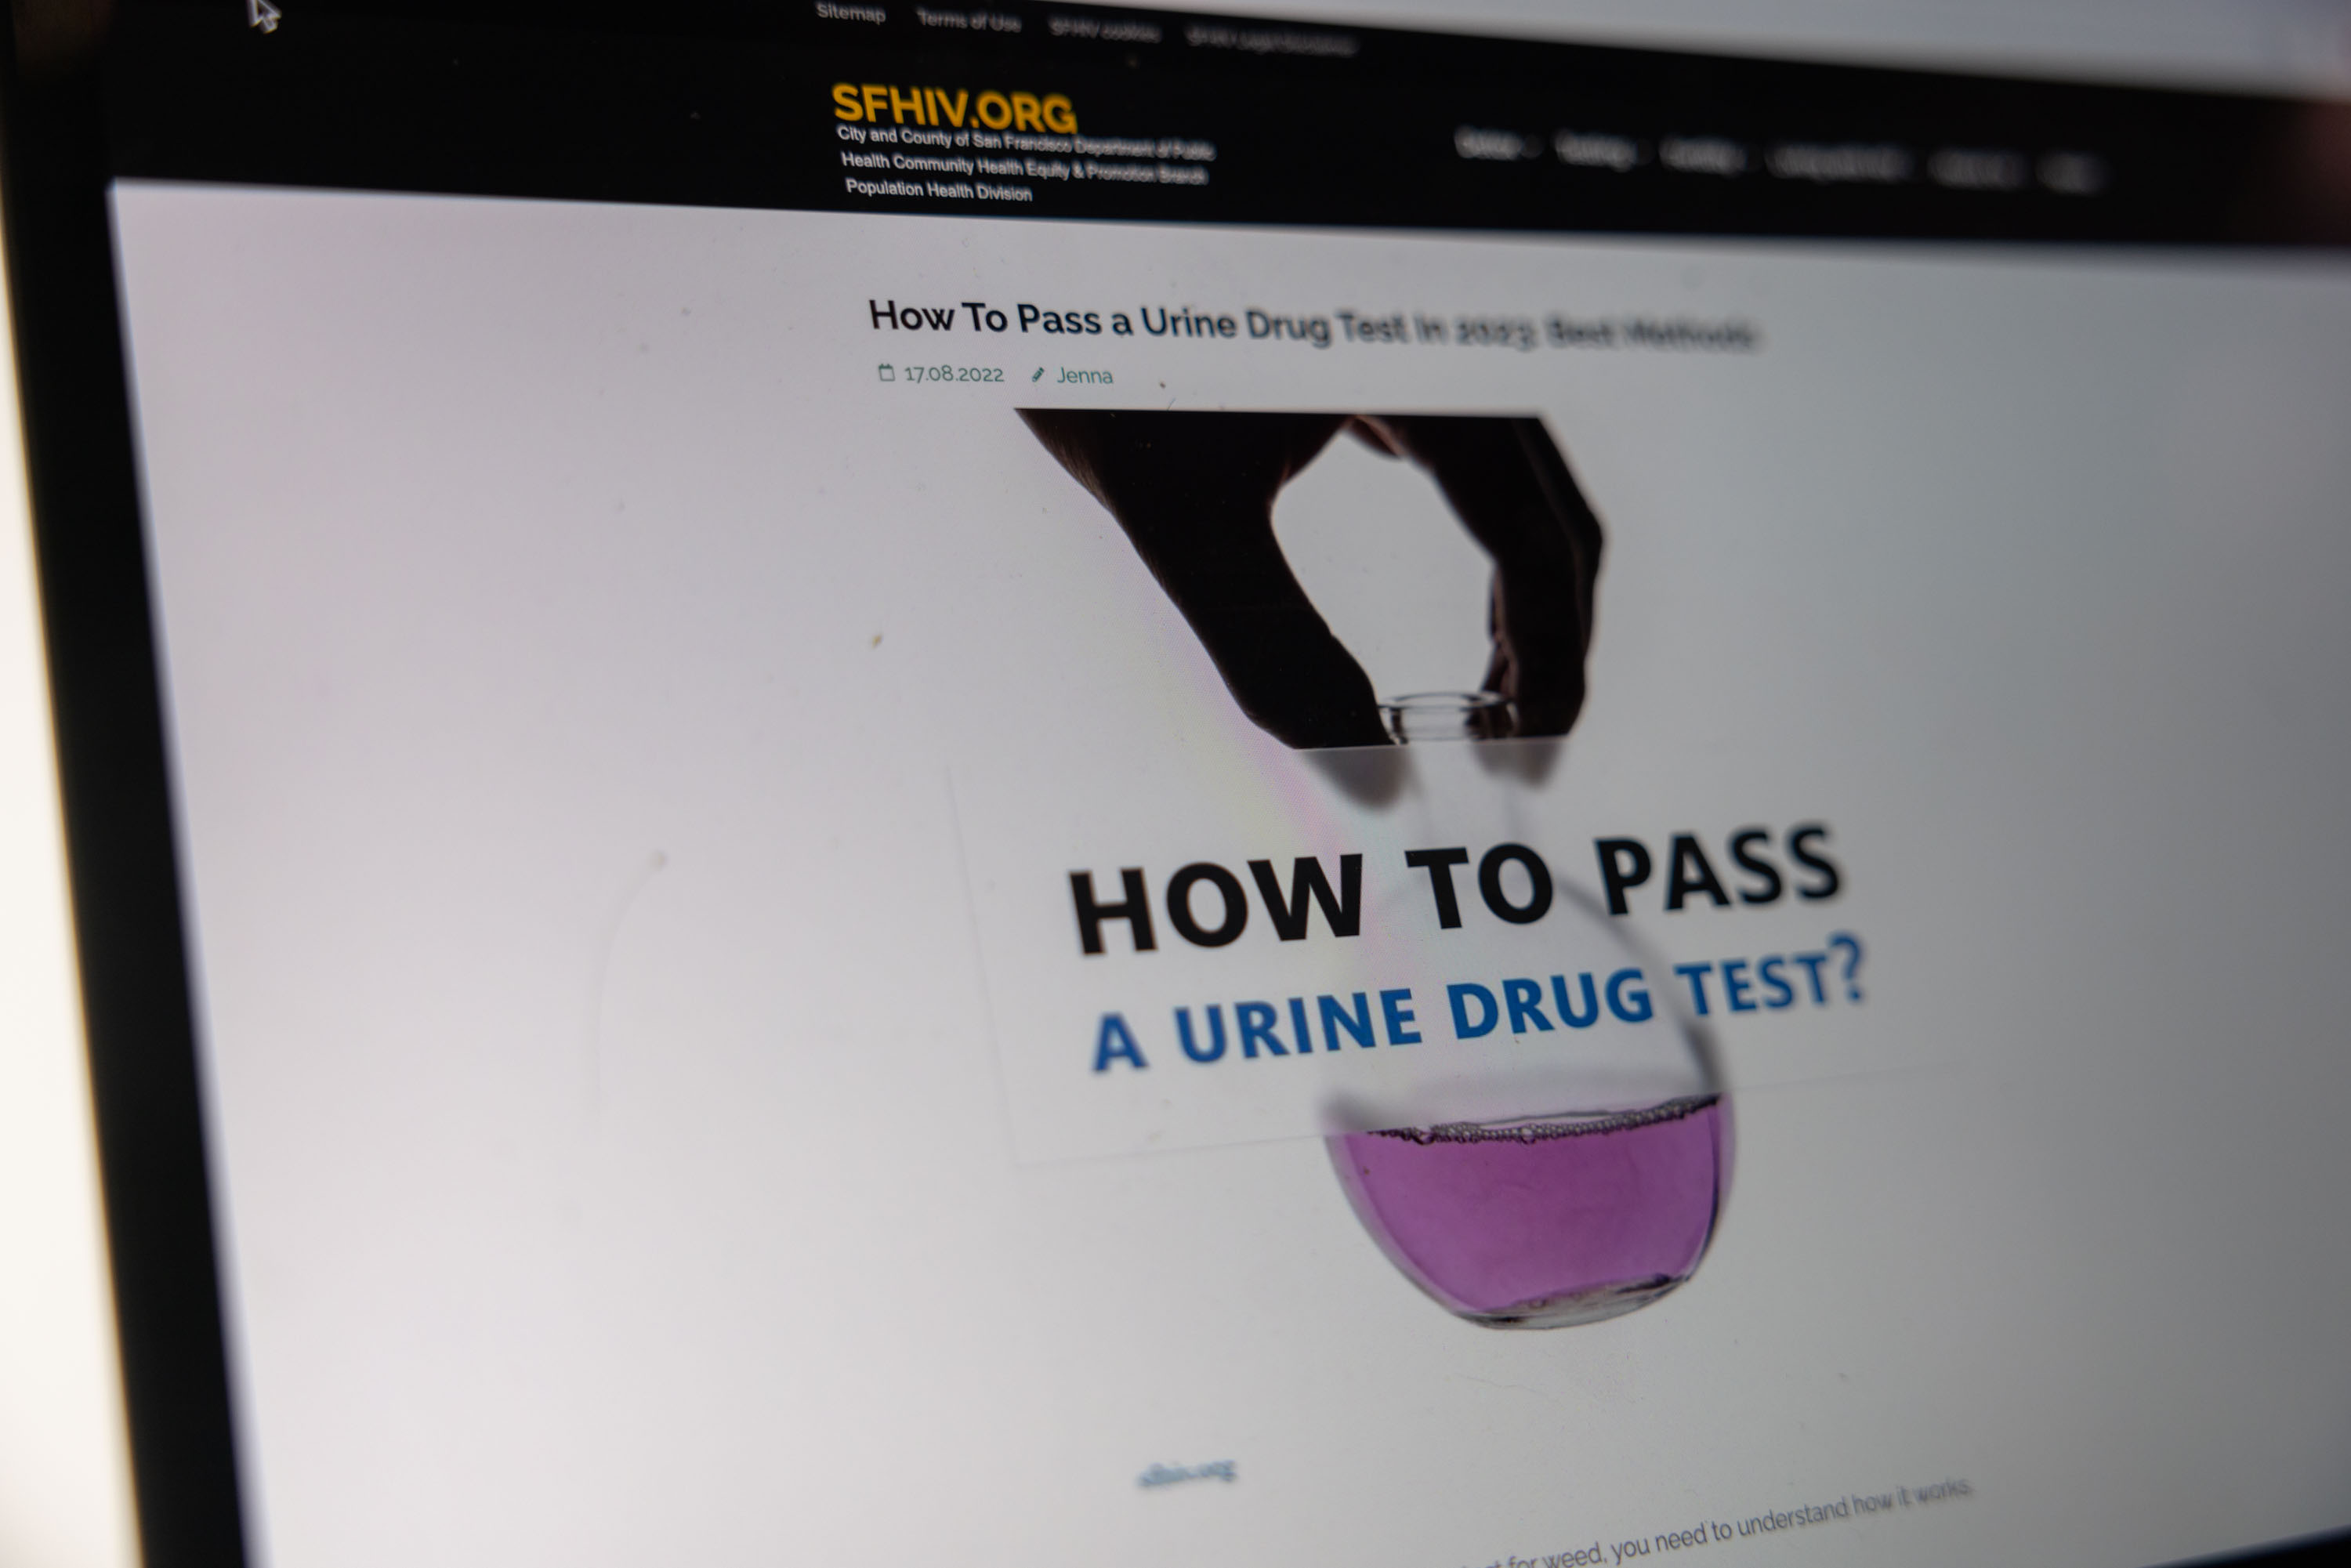 A website with products that sells items related to boost sperm production and evade cannabis drug tests.